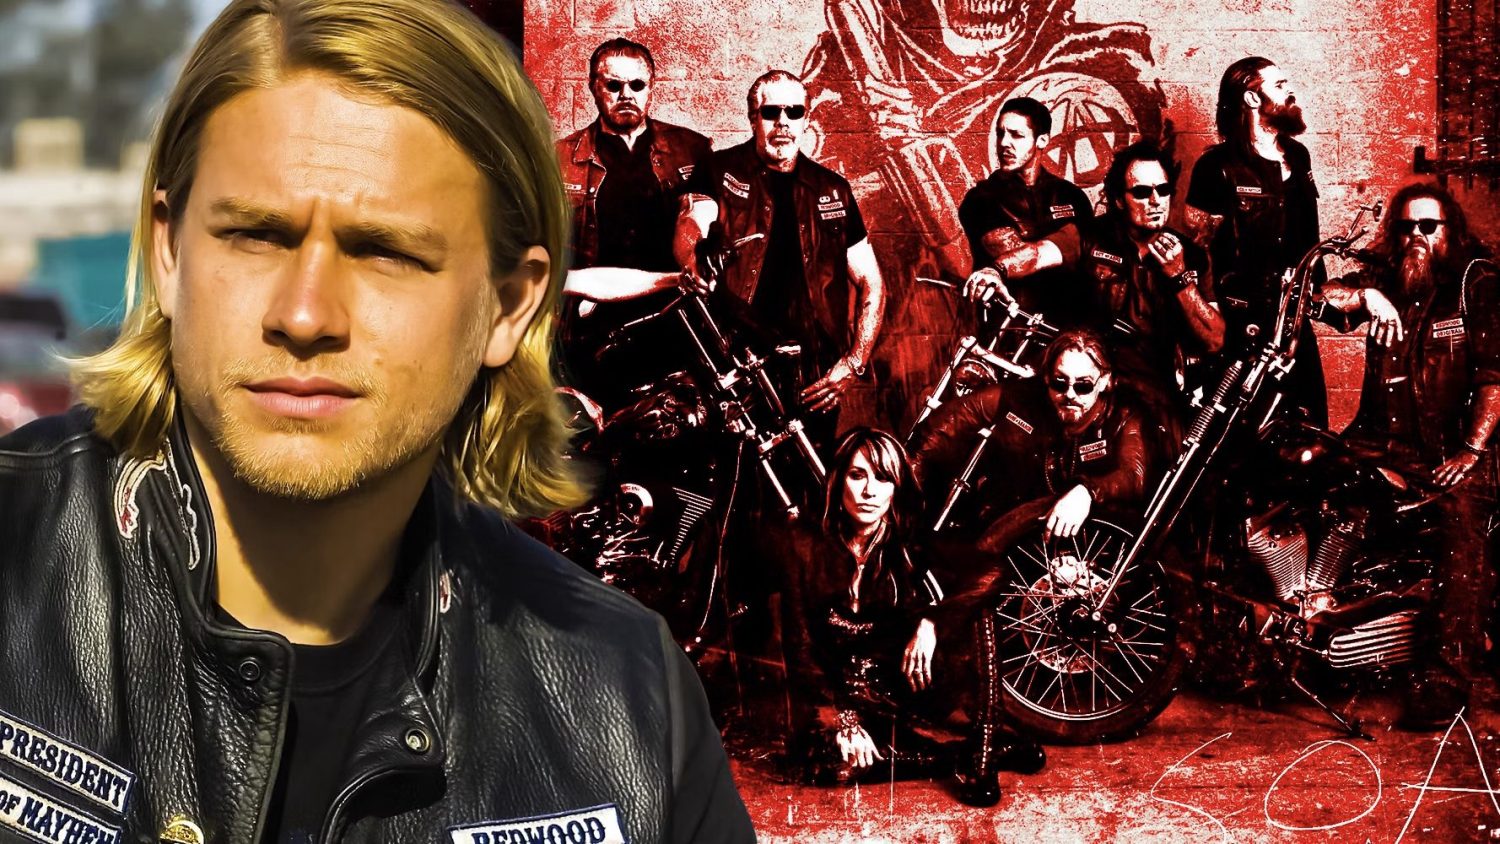 Resurgence of Sons of Anarchy